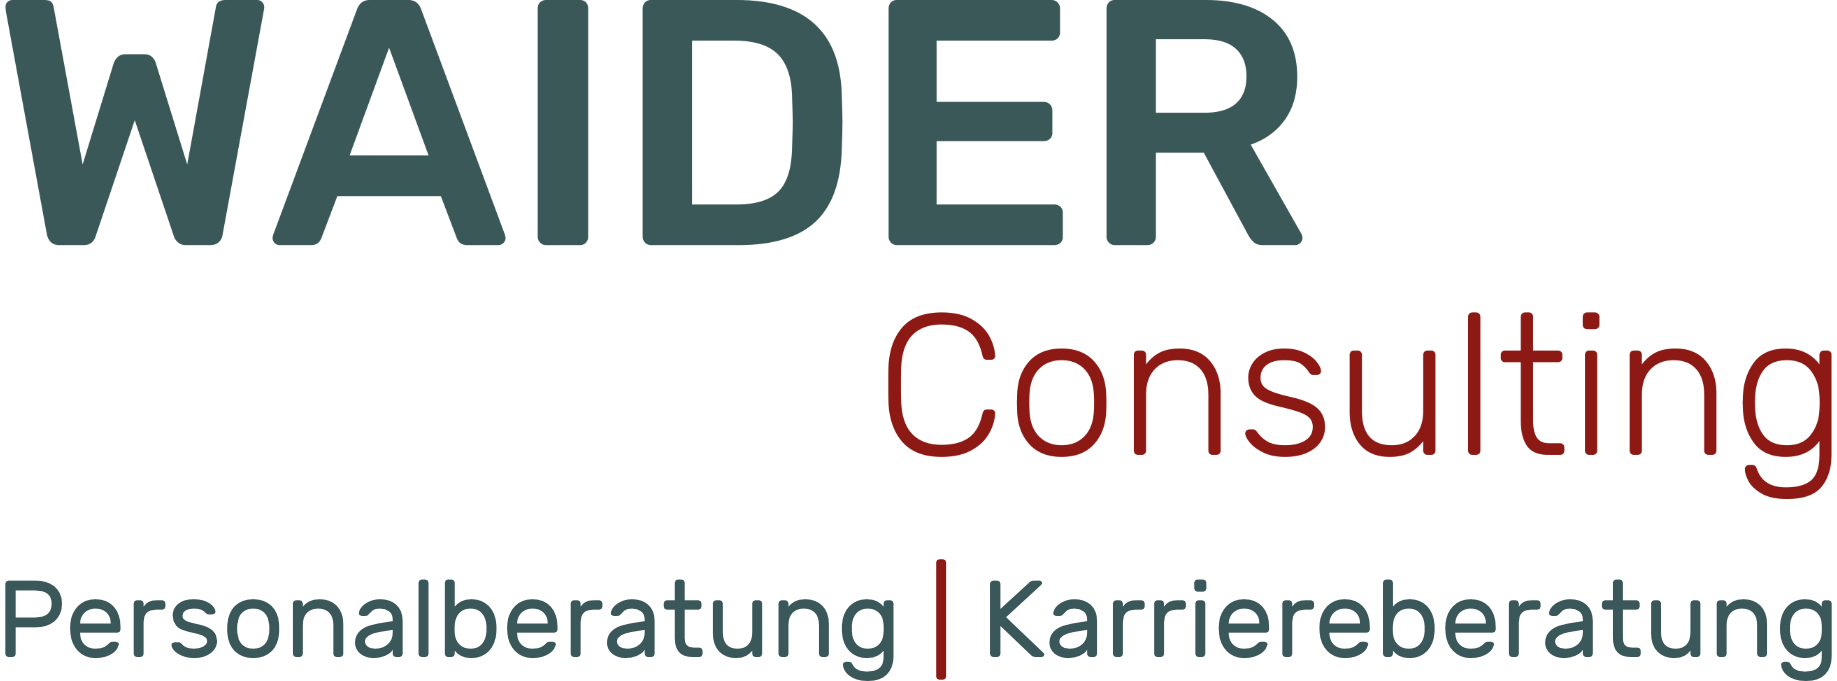 WAIDER Consulting